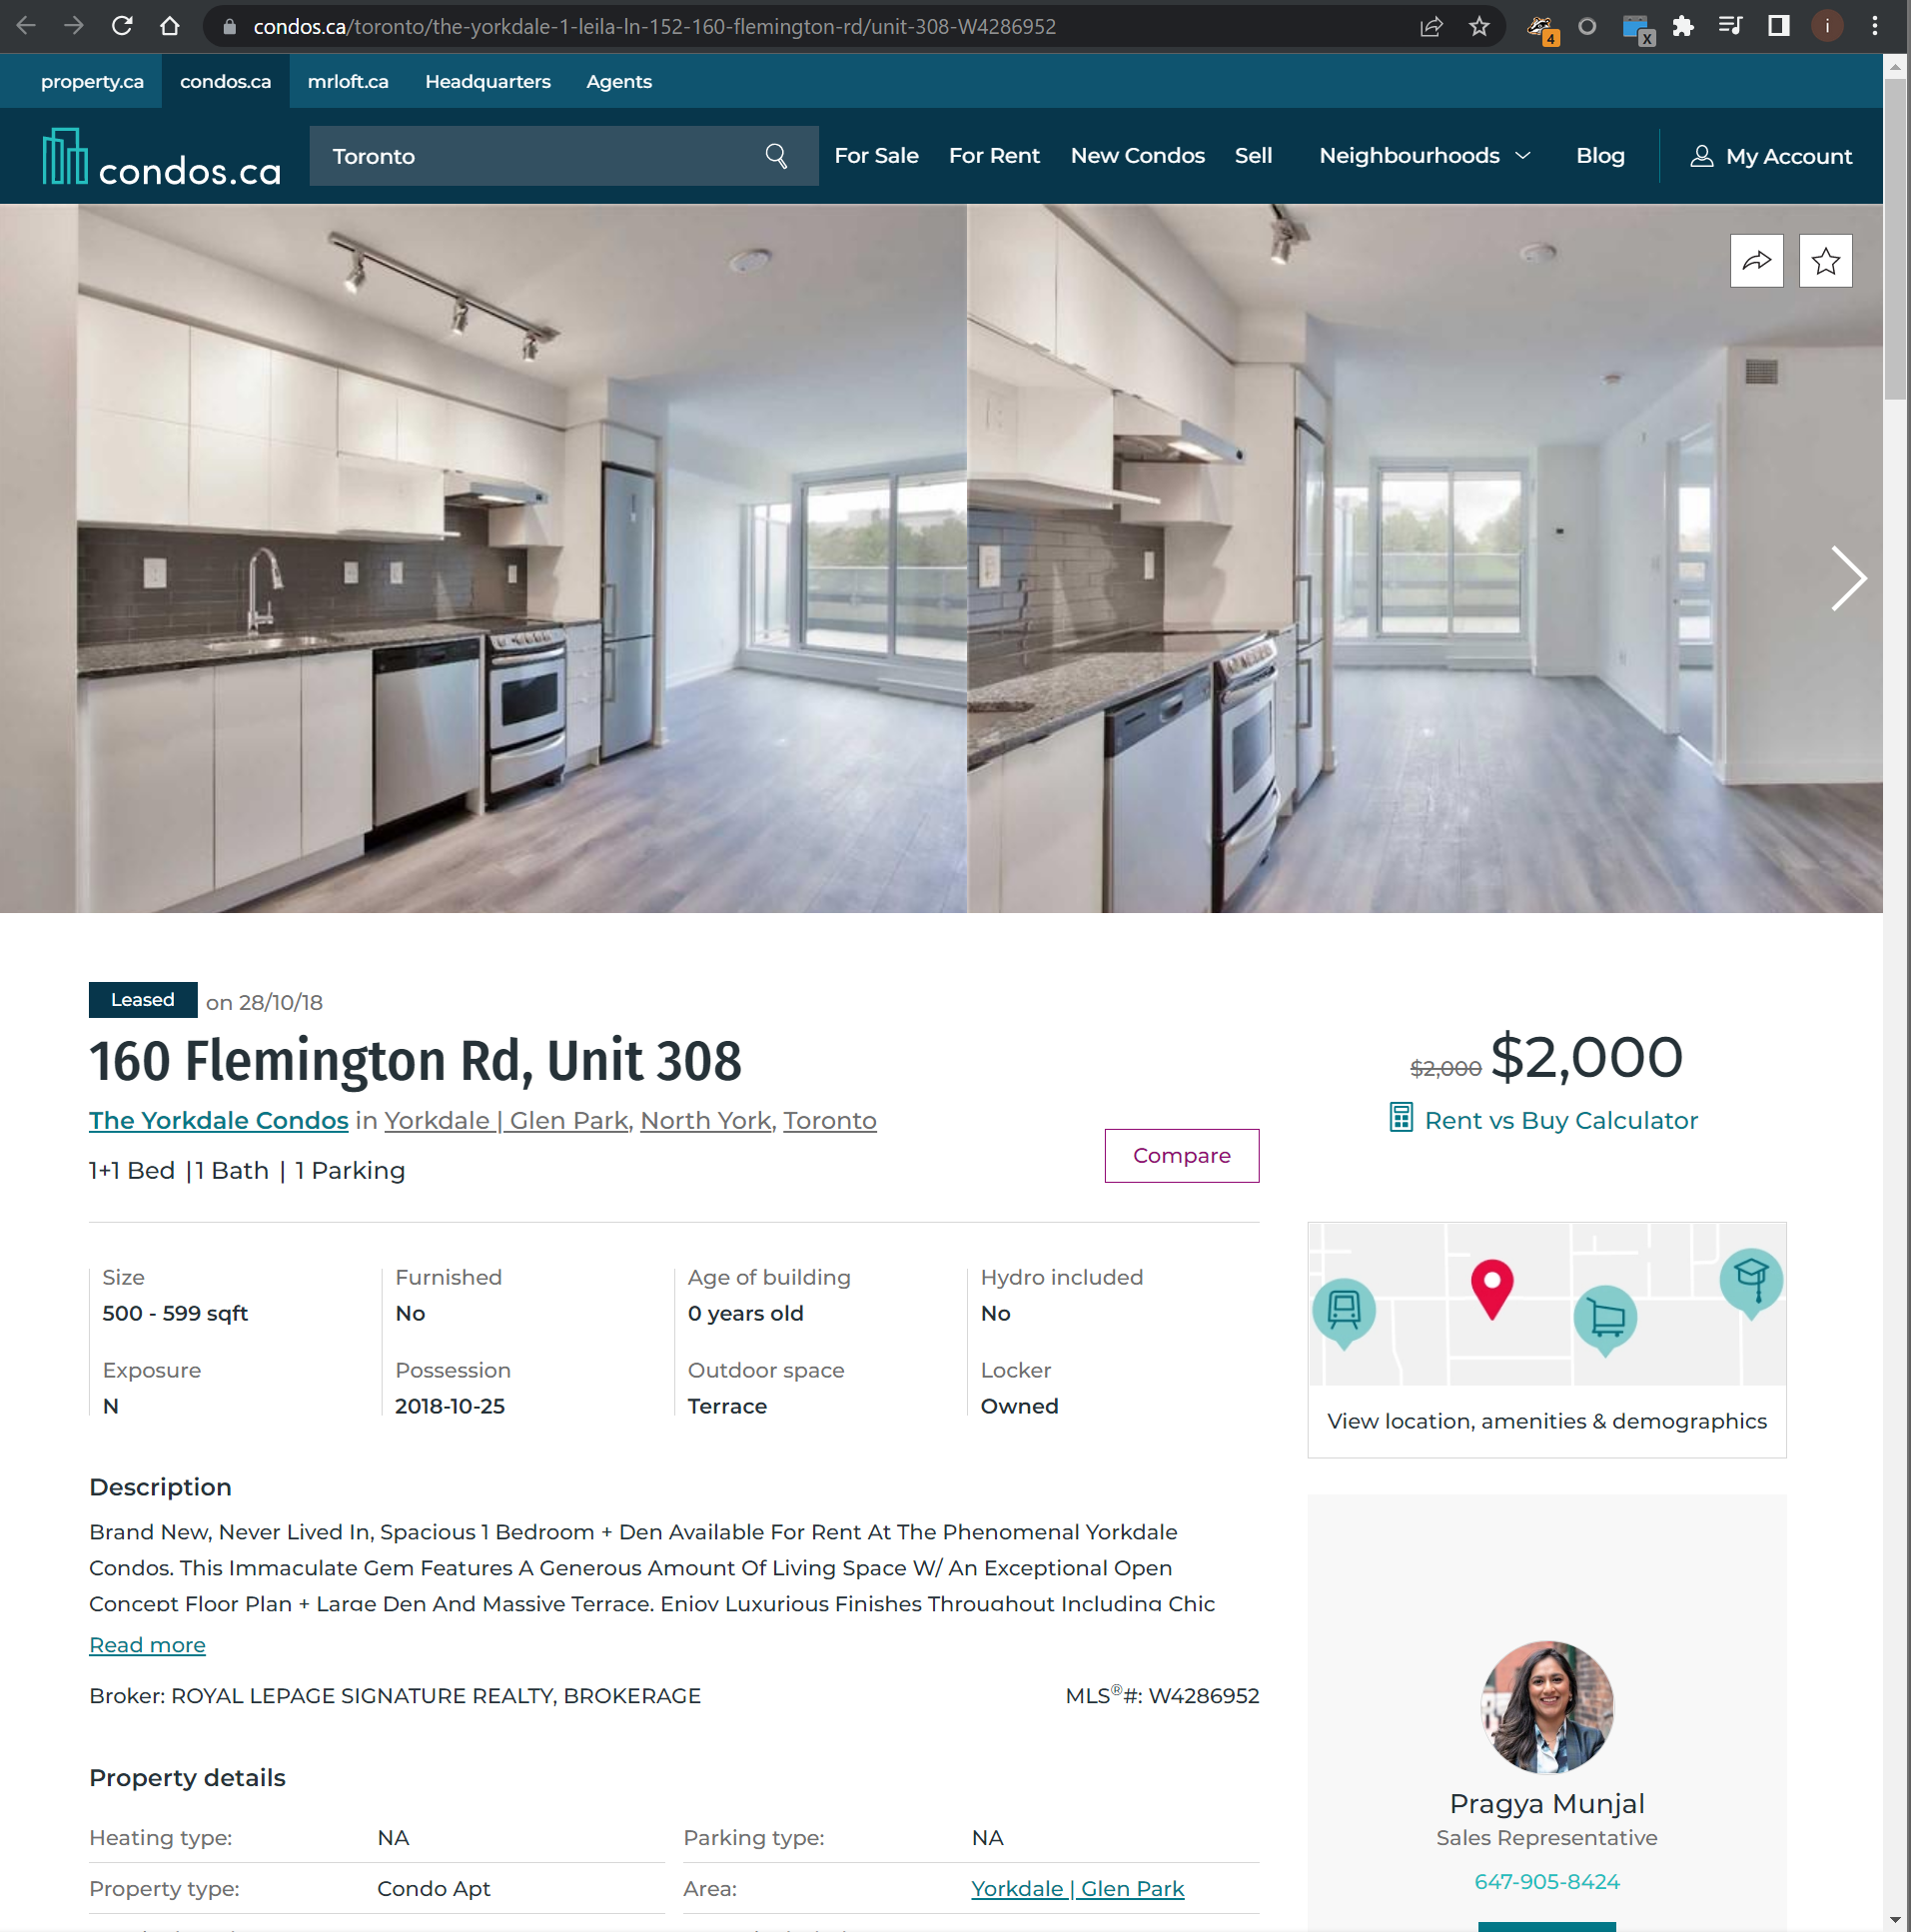 Web screenshot showing Unit 308 in 160 Flemington Rd being rented in October 2018 with possession on 2018-10-25.